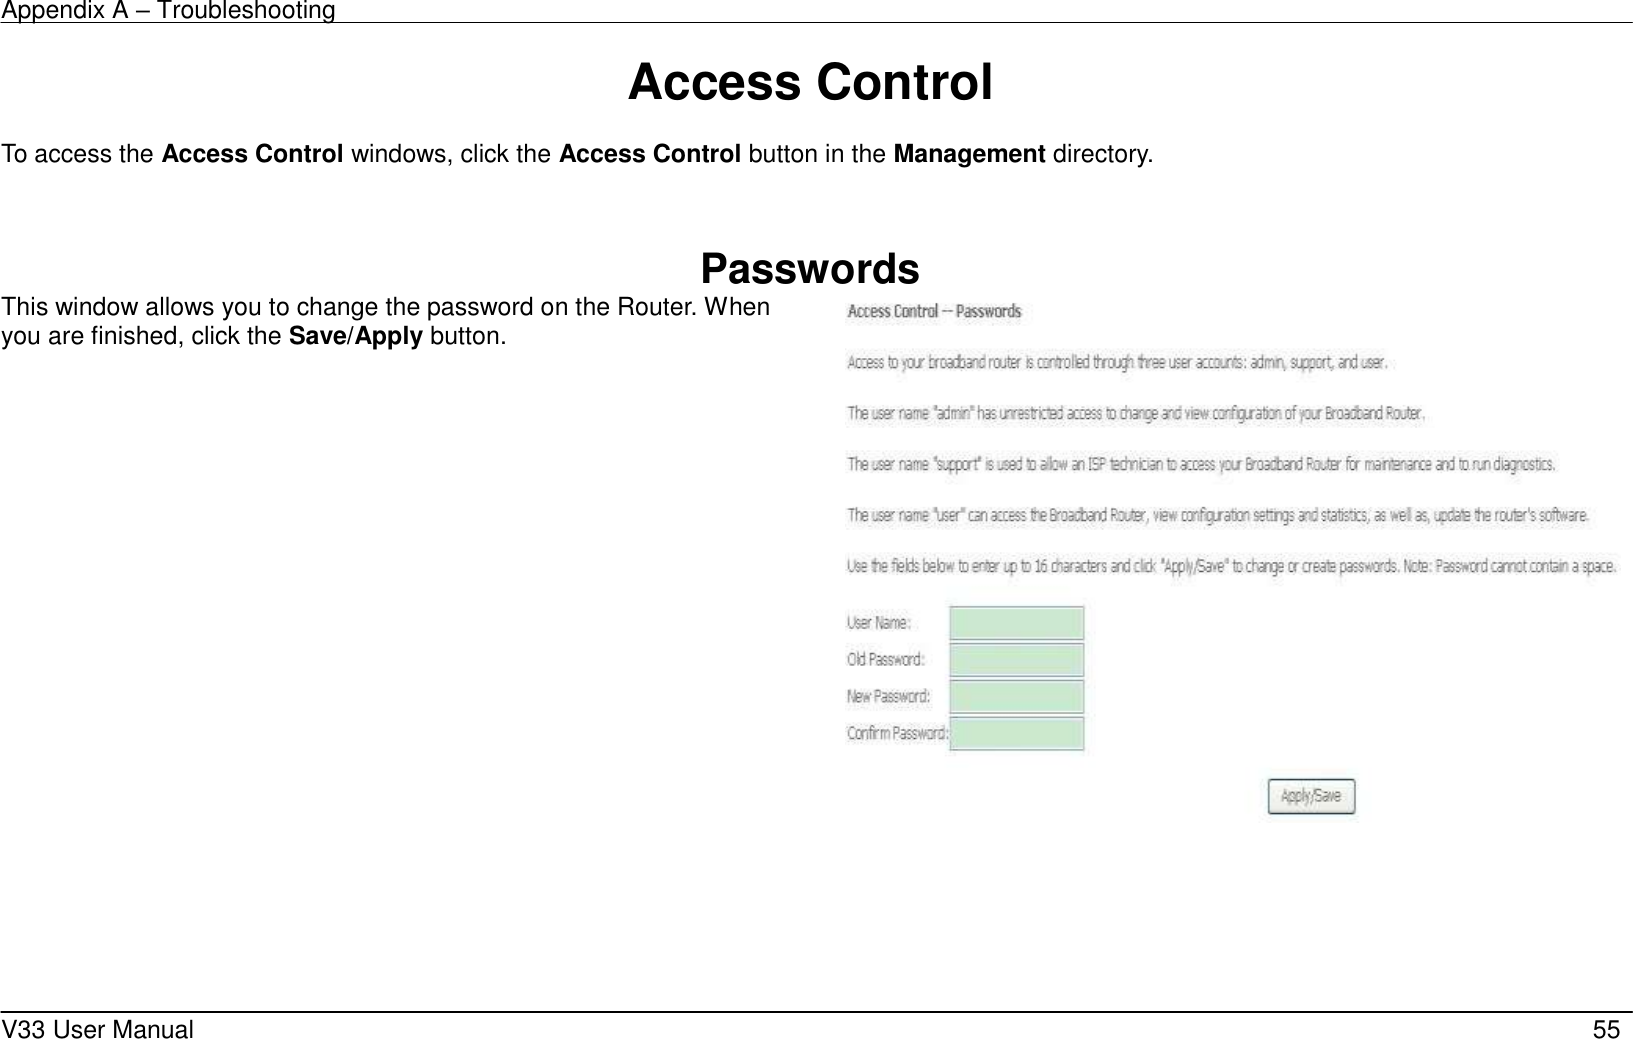 Appendix A – Troubleshooting    V33 User Manual   55 Access Control  To access the Access Control windows, click the Access Control button in the Management directory.   Passwords This window allows you to change the password on the Router. When you are finished, click the Save/Apply button.        